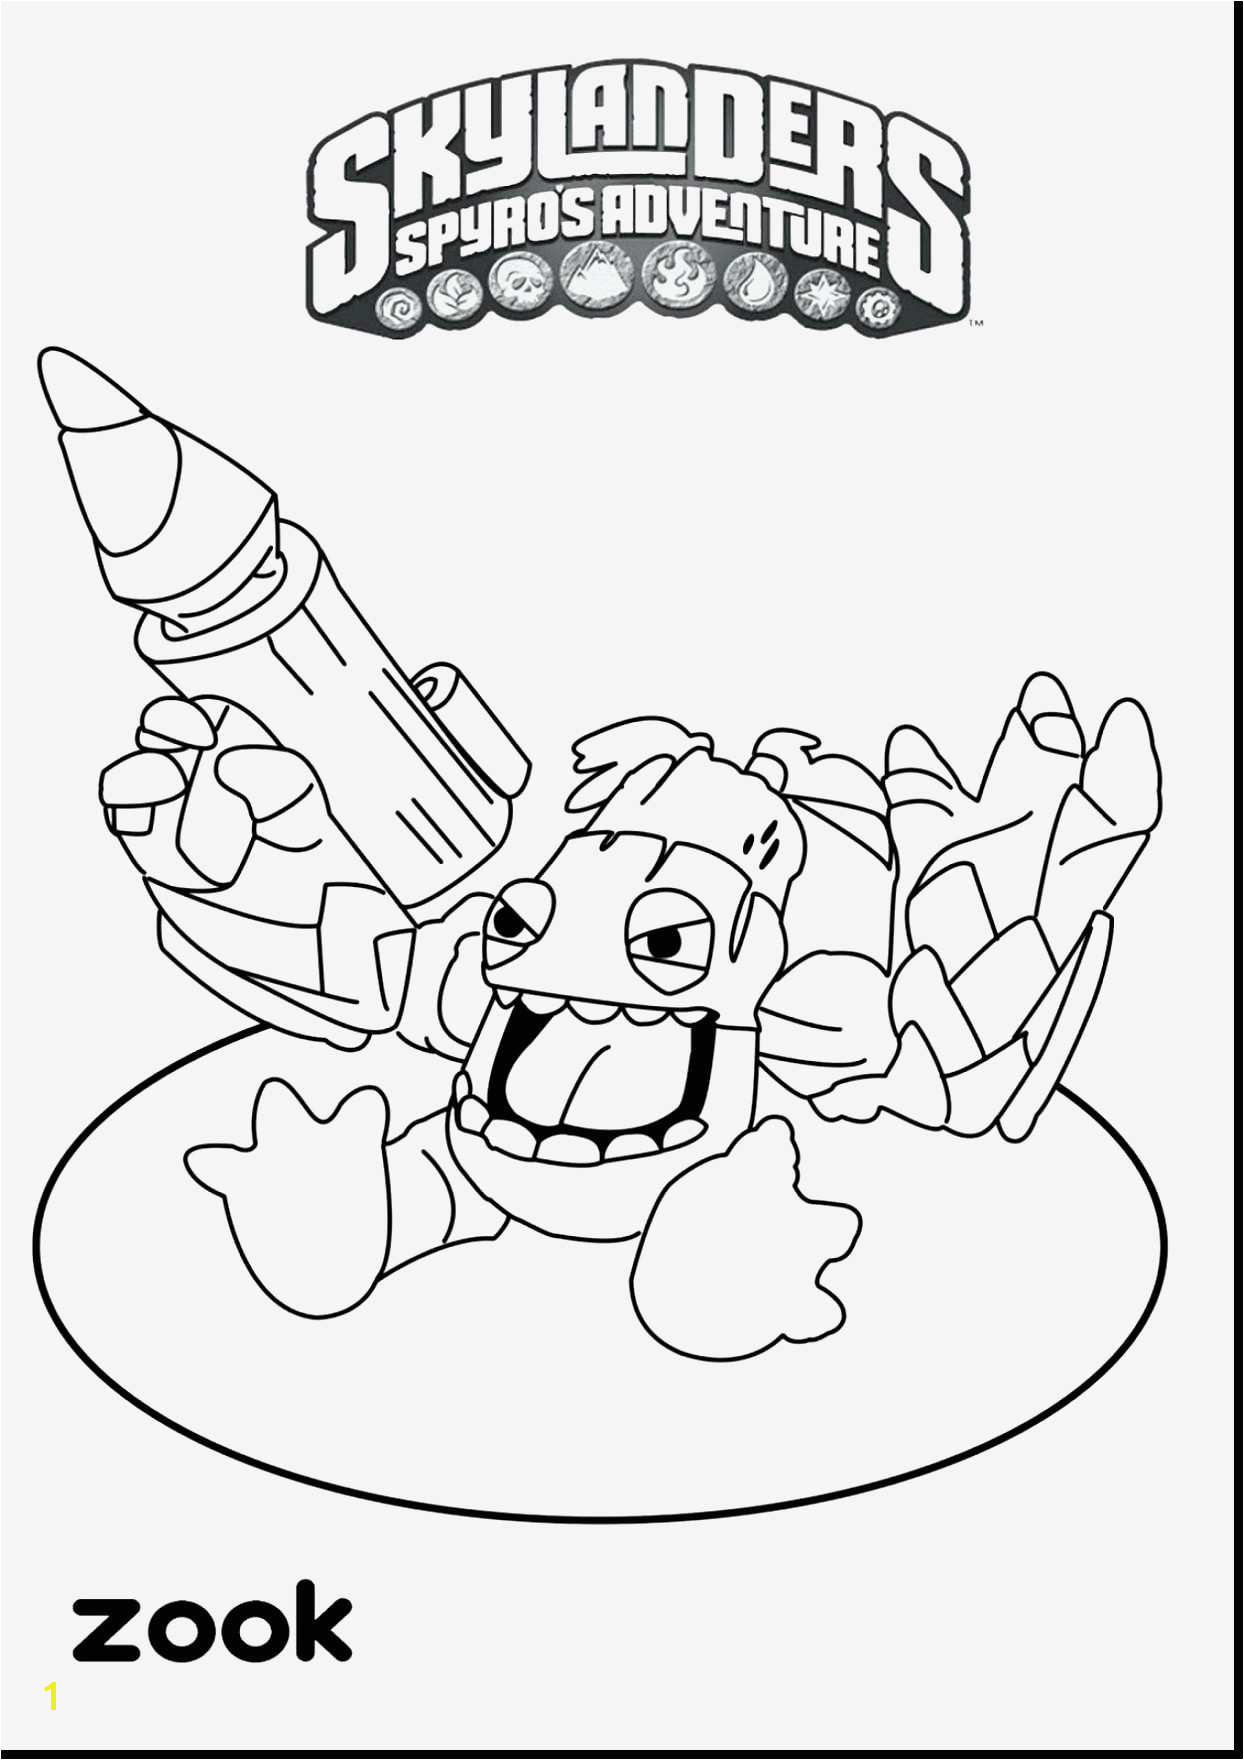 Church Halloween Coloring Pages Peppa Pig Printable Coloring Pages Best Peppa Pig Coloring Pages